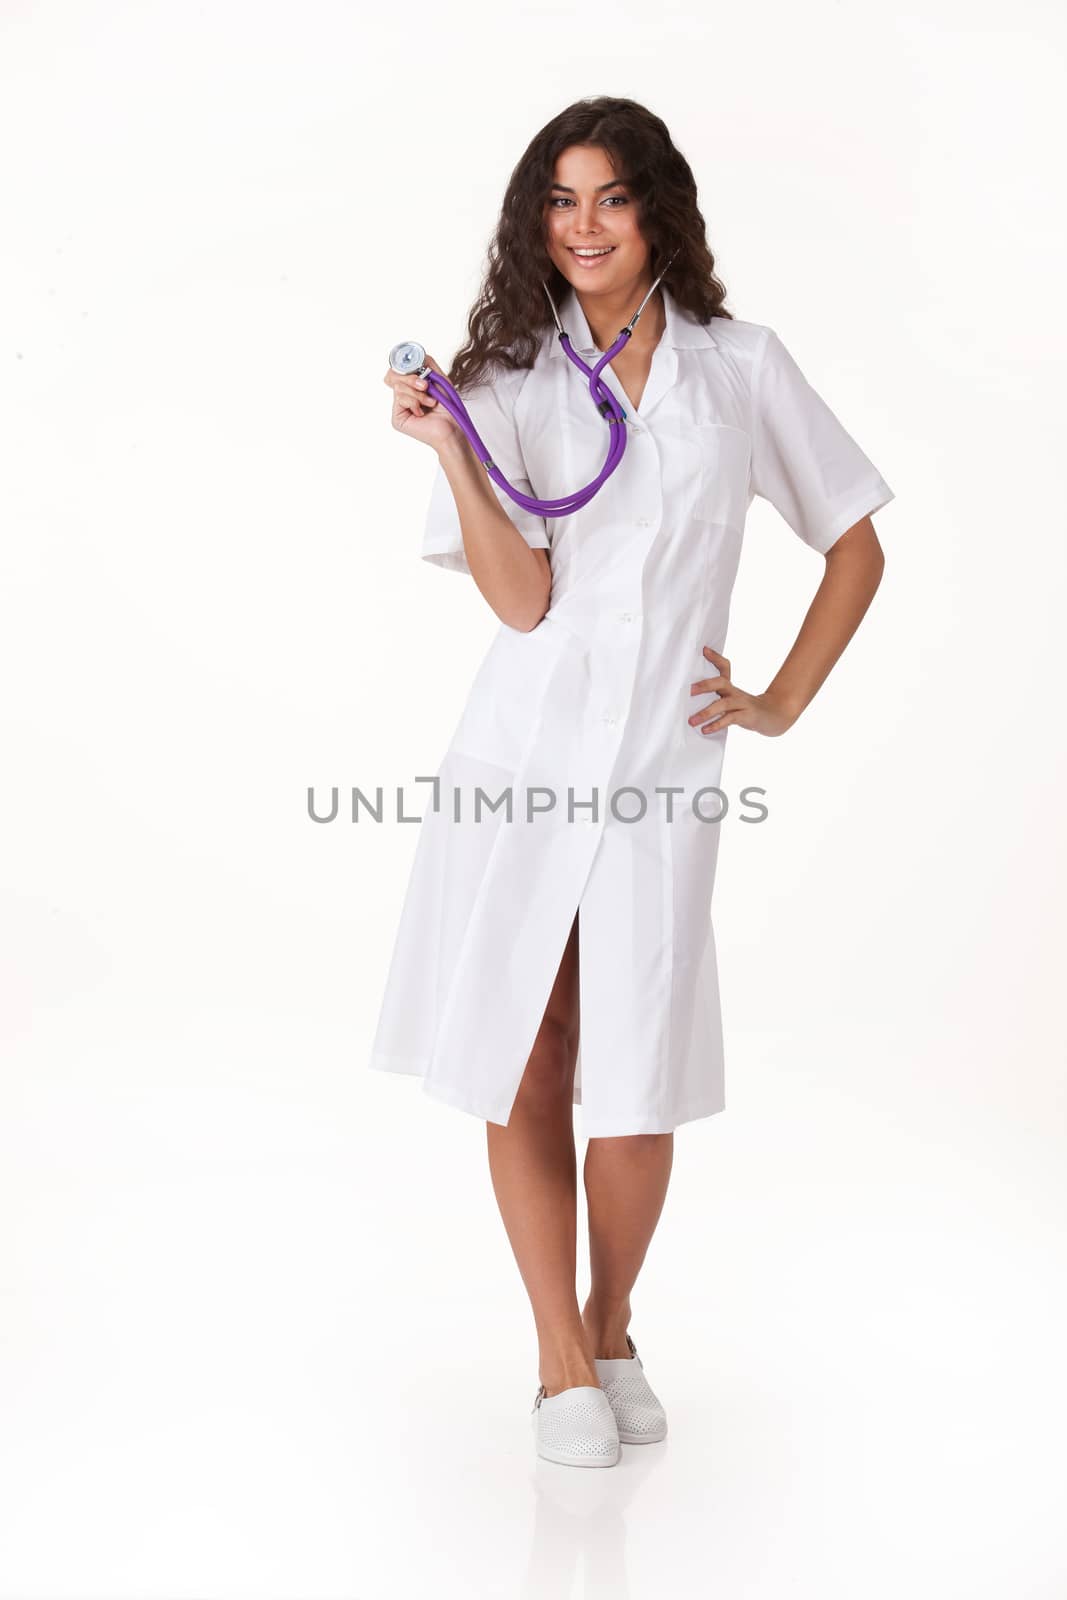 Young Woman In The Medical Uniform by Fotoskat